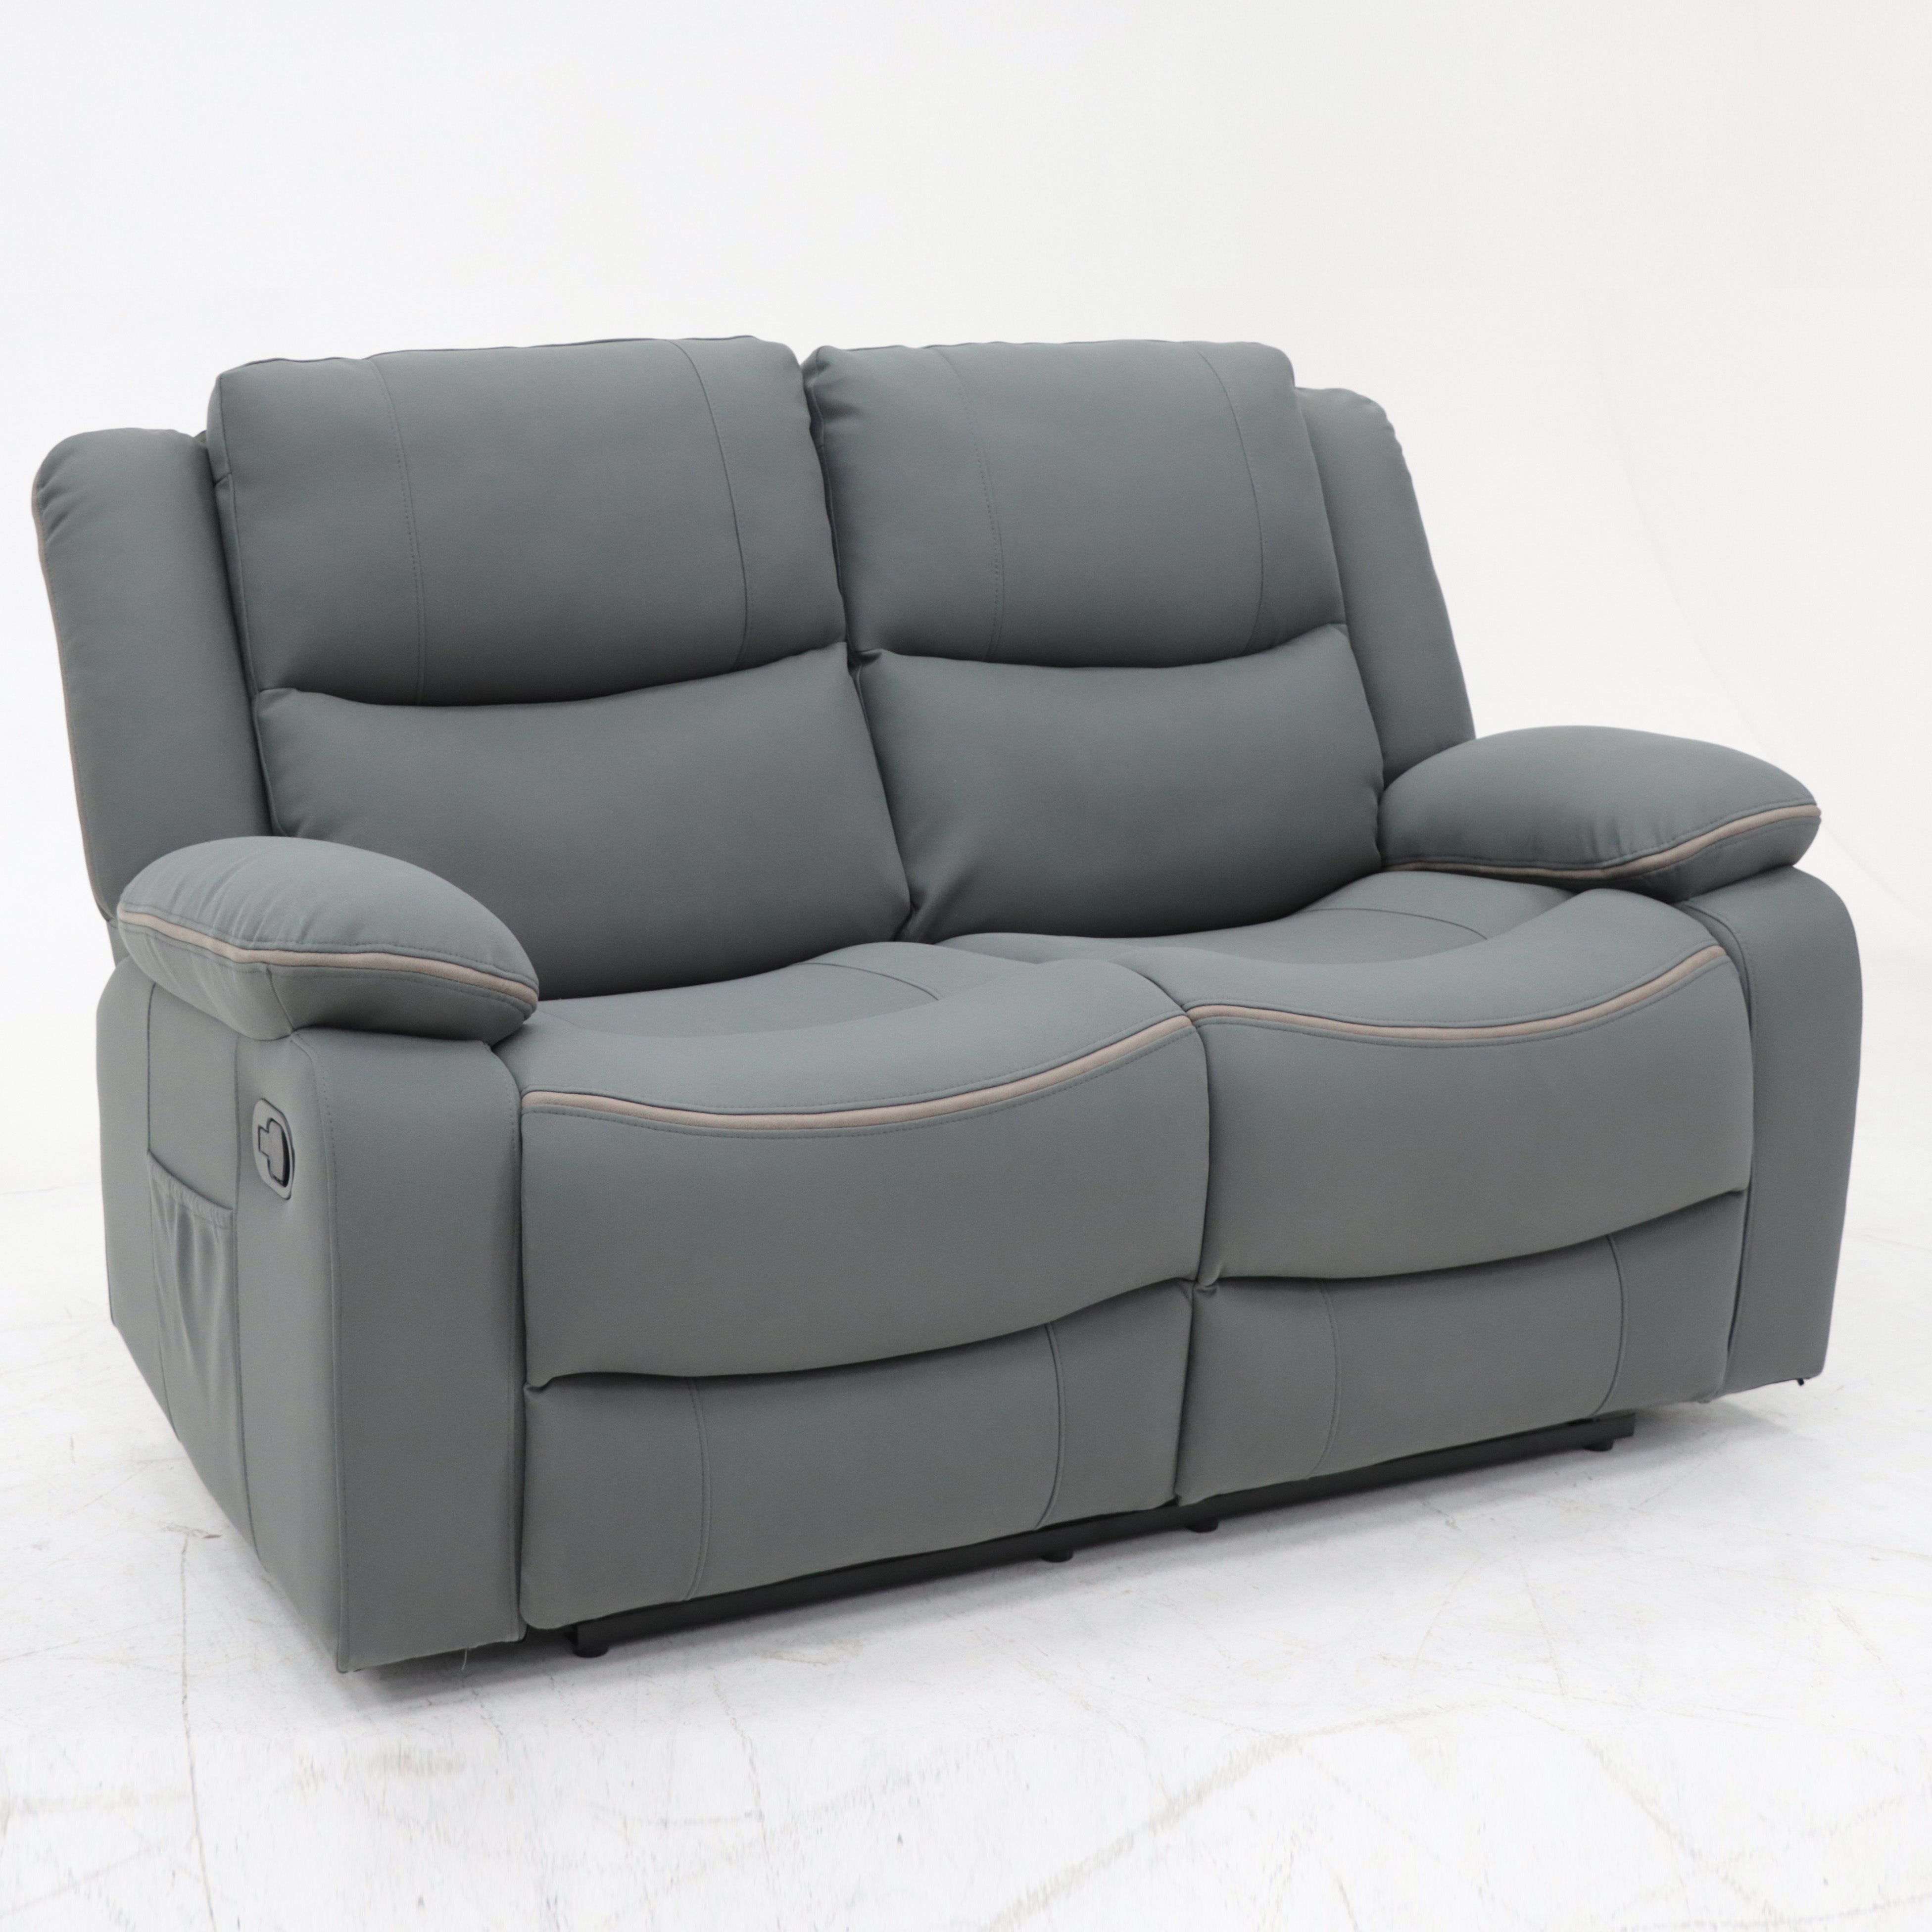 Zoe 3 Seater and 2 Seater Manual Recliner Grey Fabric